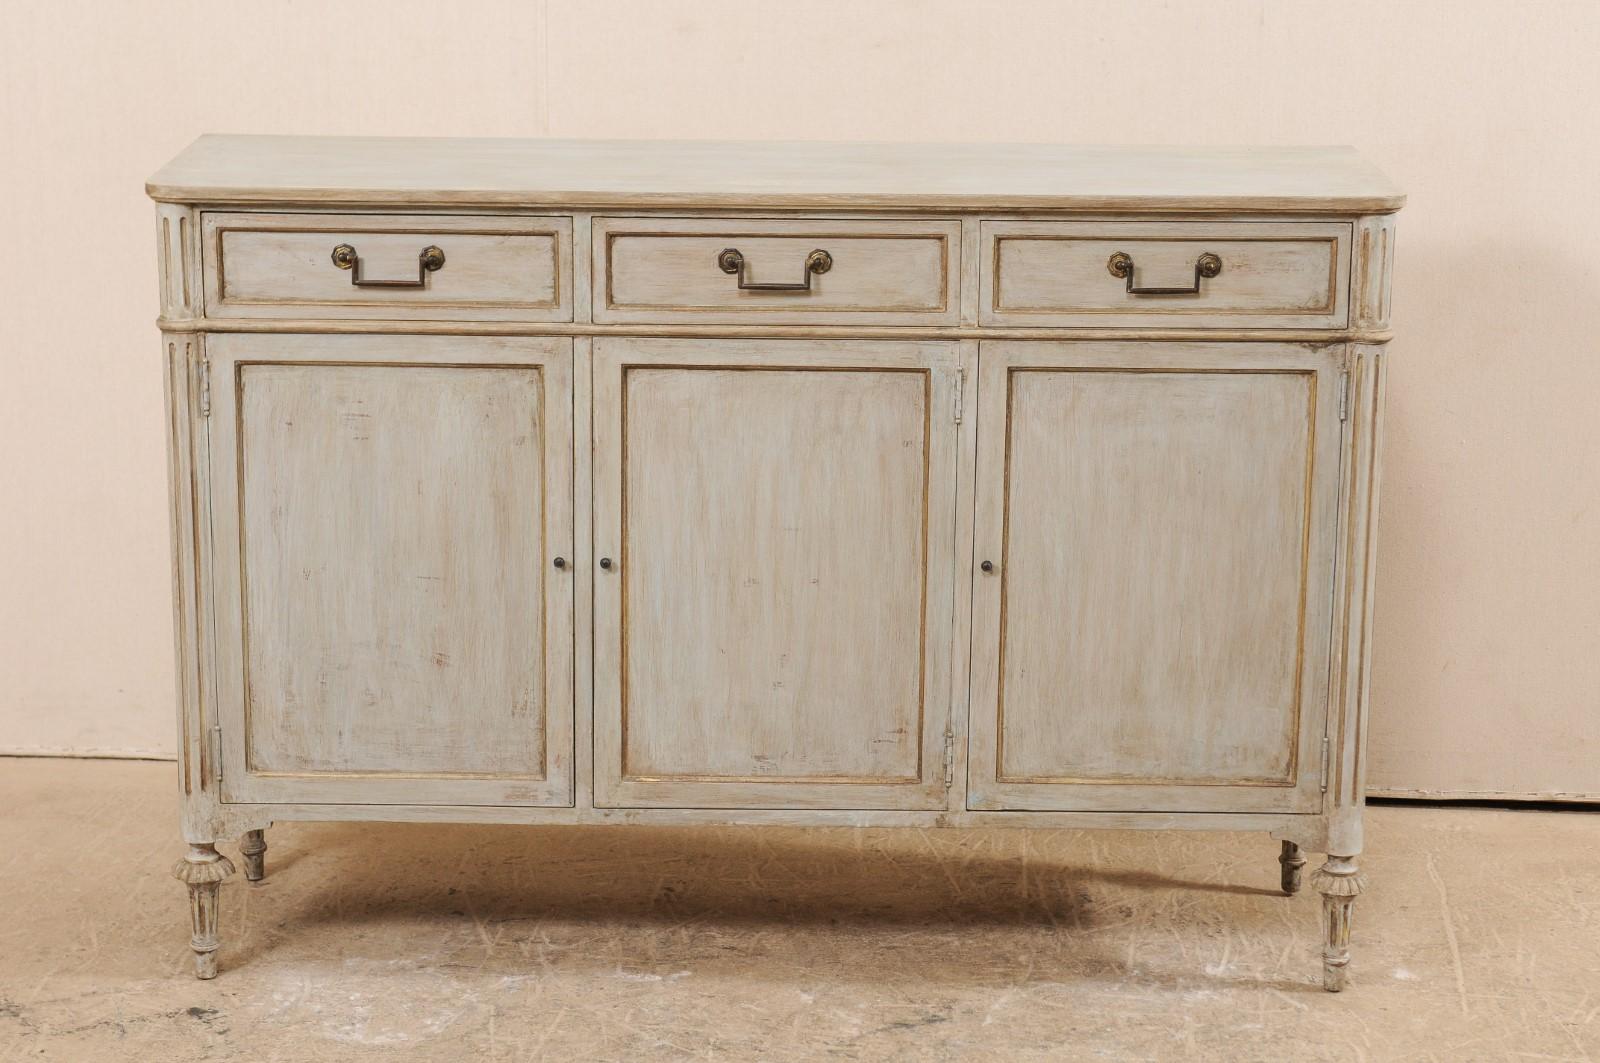 A French painted wood buffet cabinet from the mid-20th century. This vintage cabinet from France features a rectangular-shaped top which rests above three upper recessed panel drawers, and three recessed panel doors below. Flanked by front side